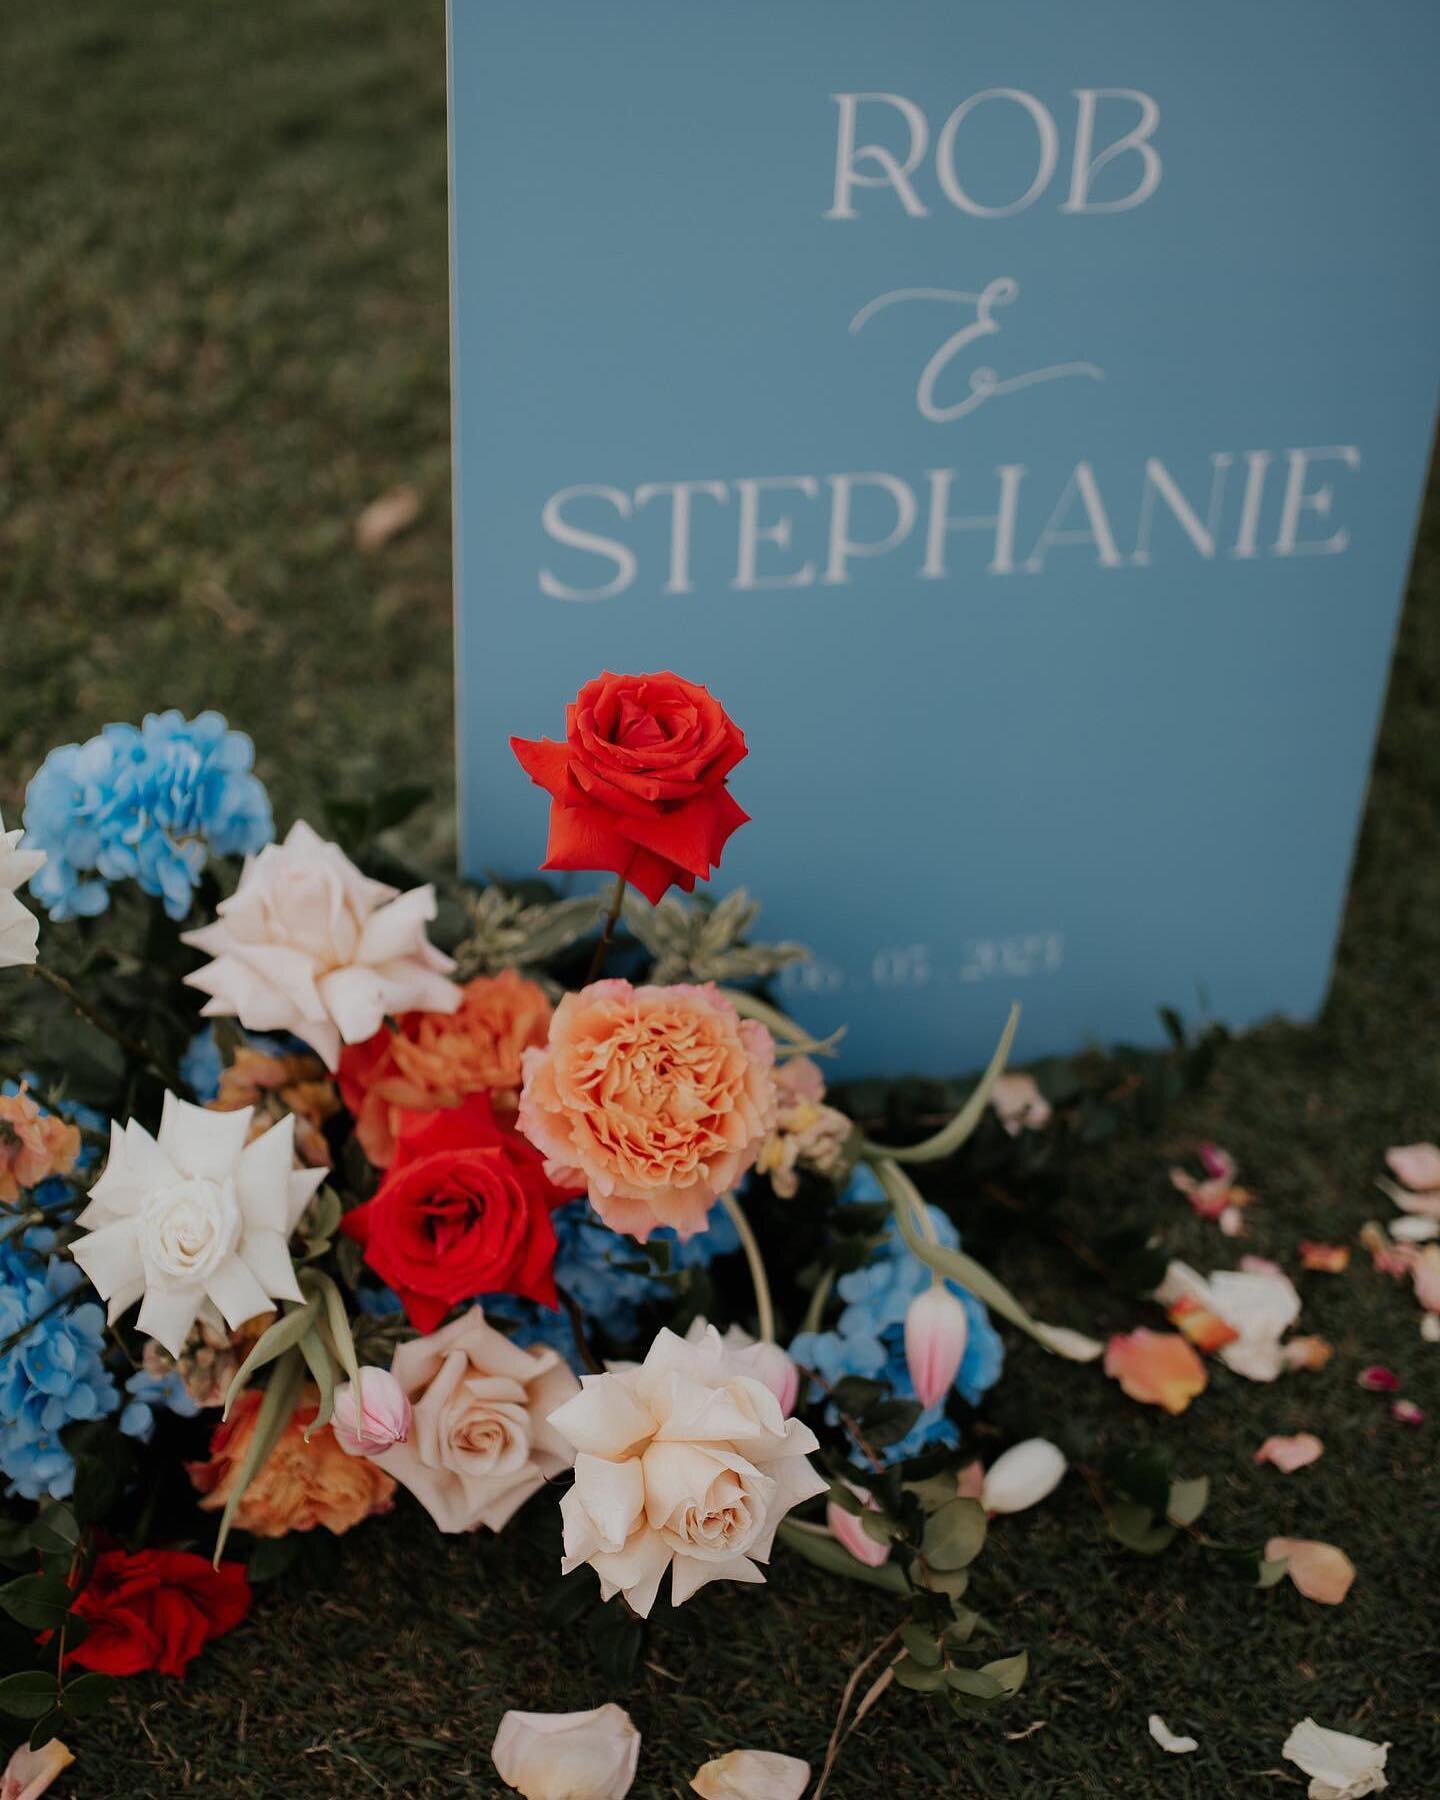 All about the fleurs. In all honesty I was a little nervous to create this colour bomb! My bride Steph came to me from Adelaide with a vision and together I think it was executed perfectly! 💍✨💙

What is scary with flowers is that you can request th